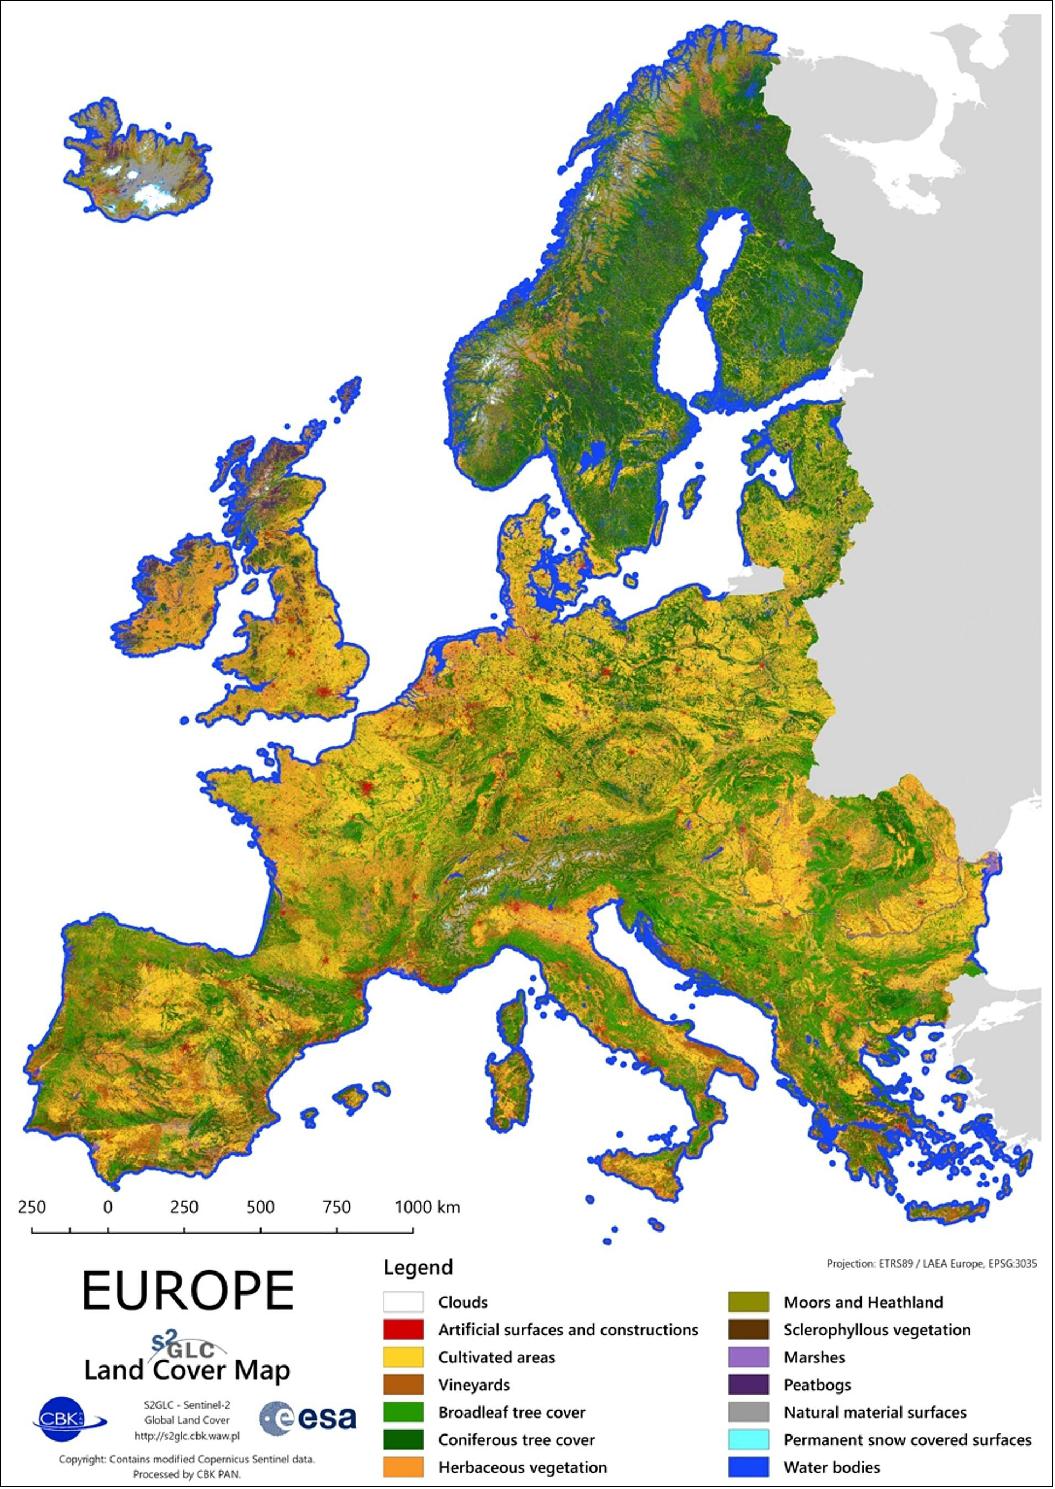 Figure 50: Europe land-cover mapped in 10 m resolution of 2017 (image credit: ESA, the image contains modified Copernicus Sentinel data (2017), processed by CBK PANsí mi)